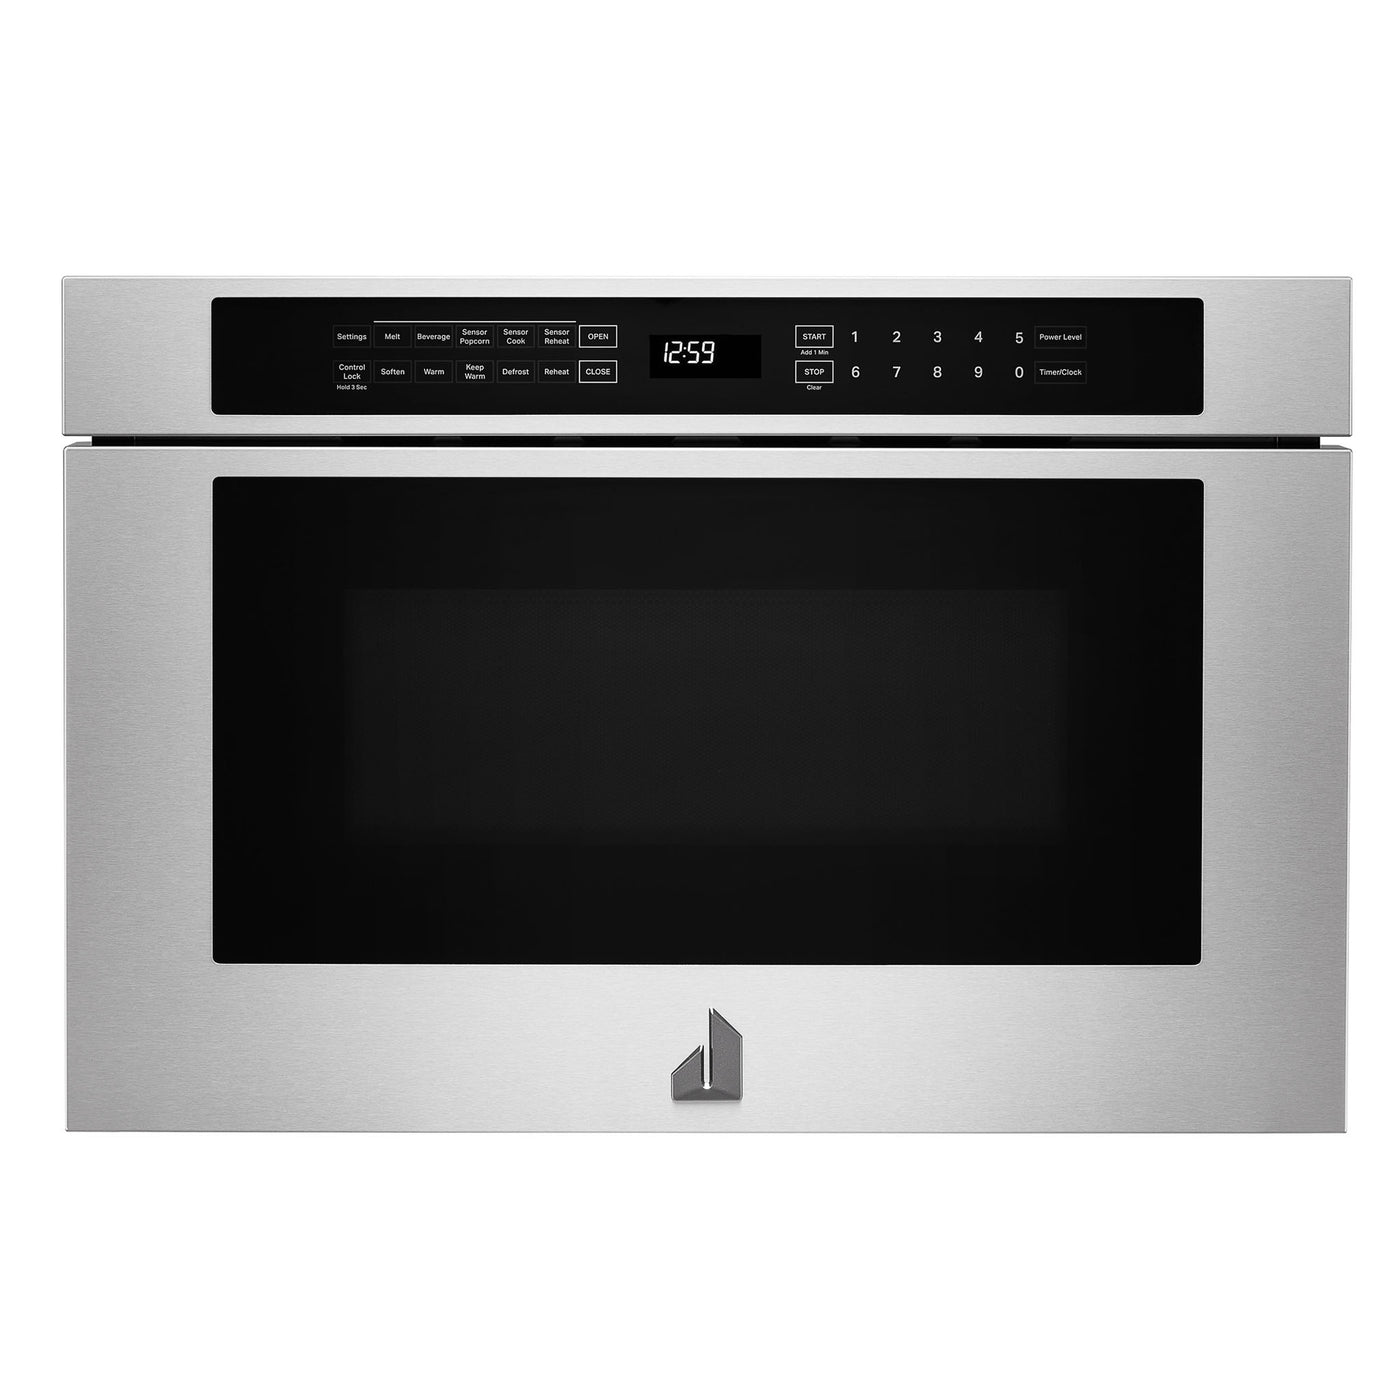 24” RISE™ Under Counter Microwave Oven with Drawer Design